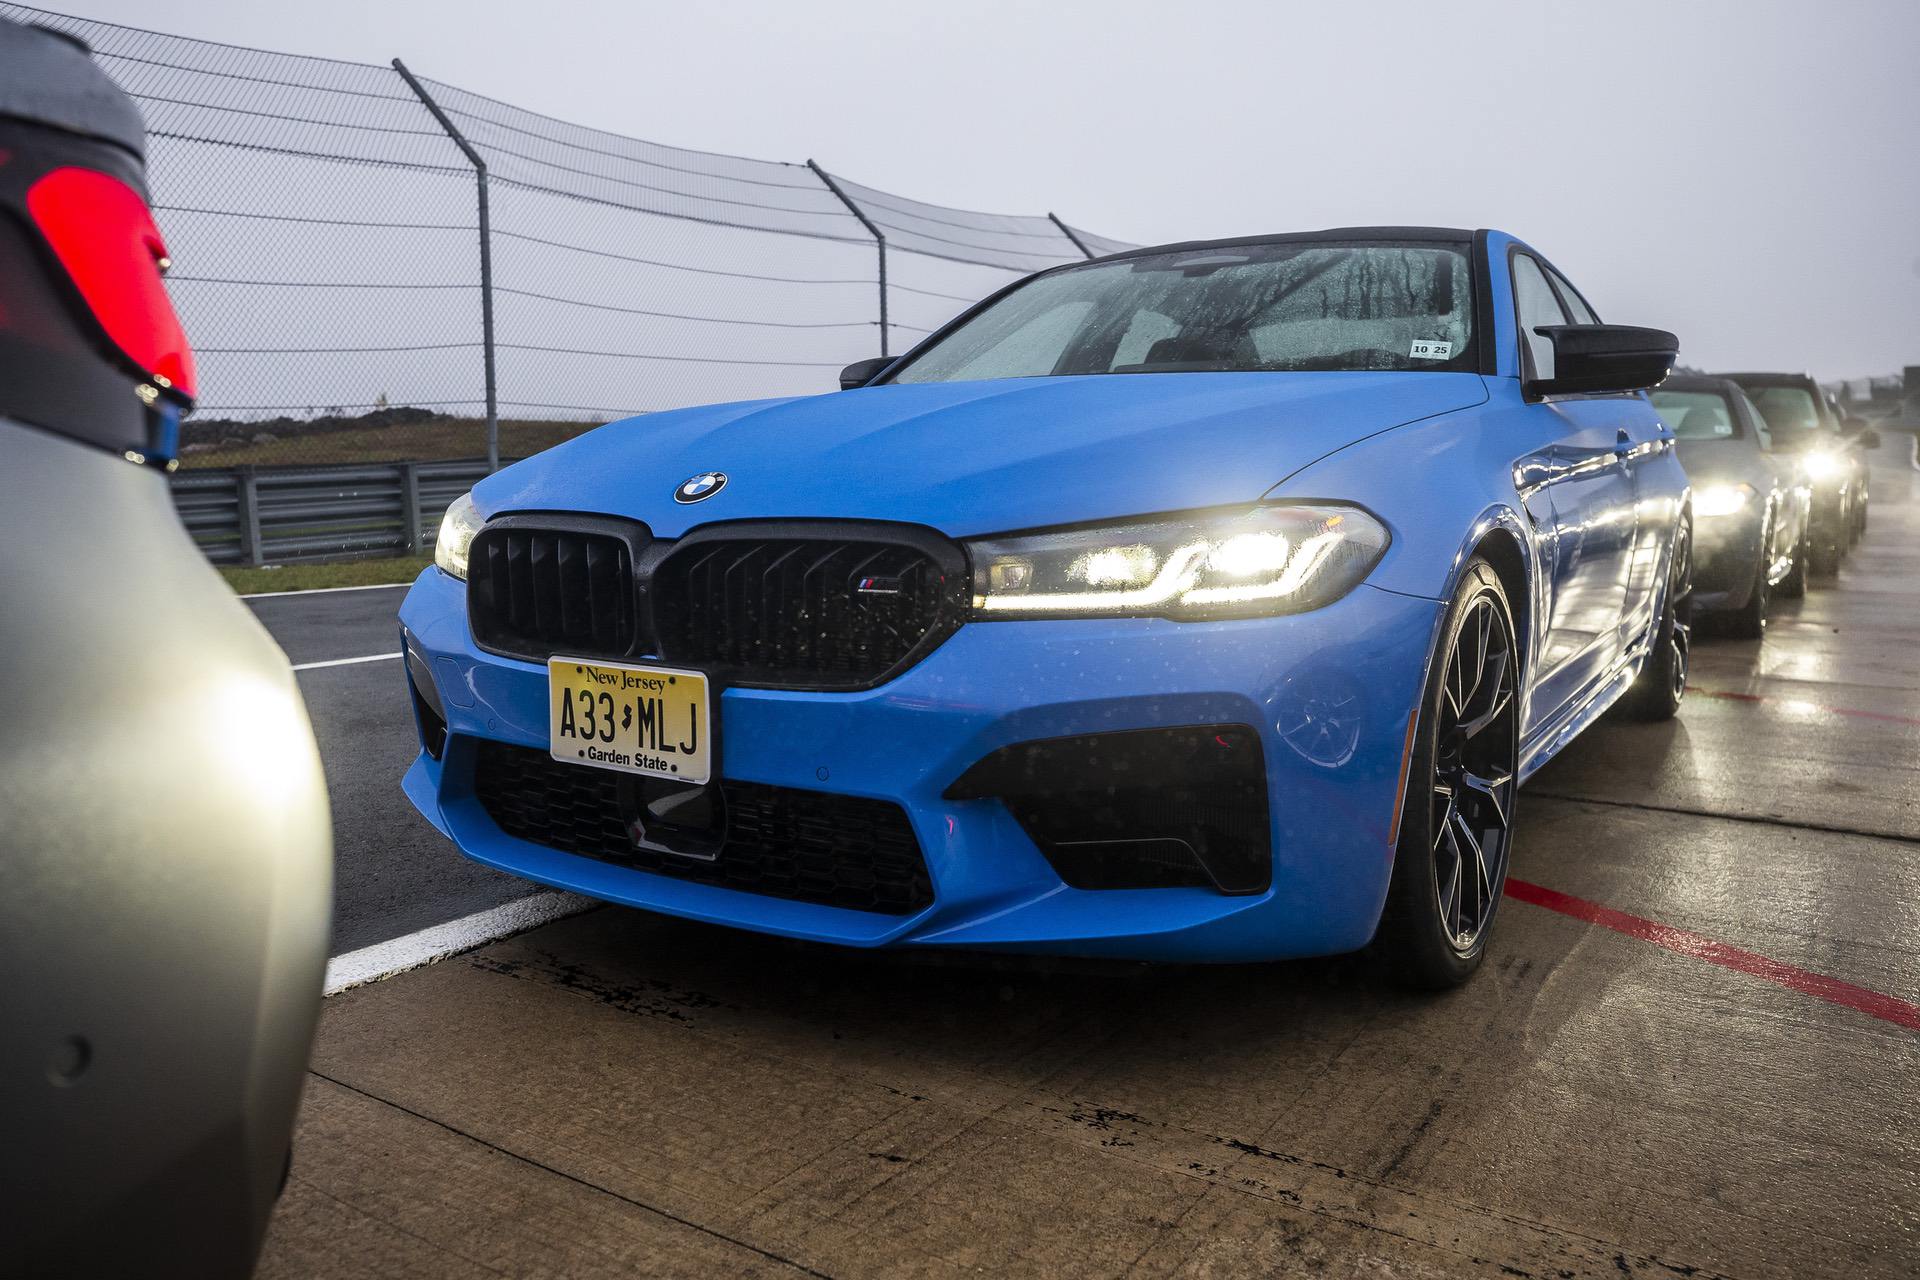 One-of-a-Kind: 2021 BMW M5 Facelift in Voodoo Blue Metallic